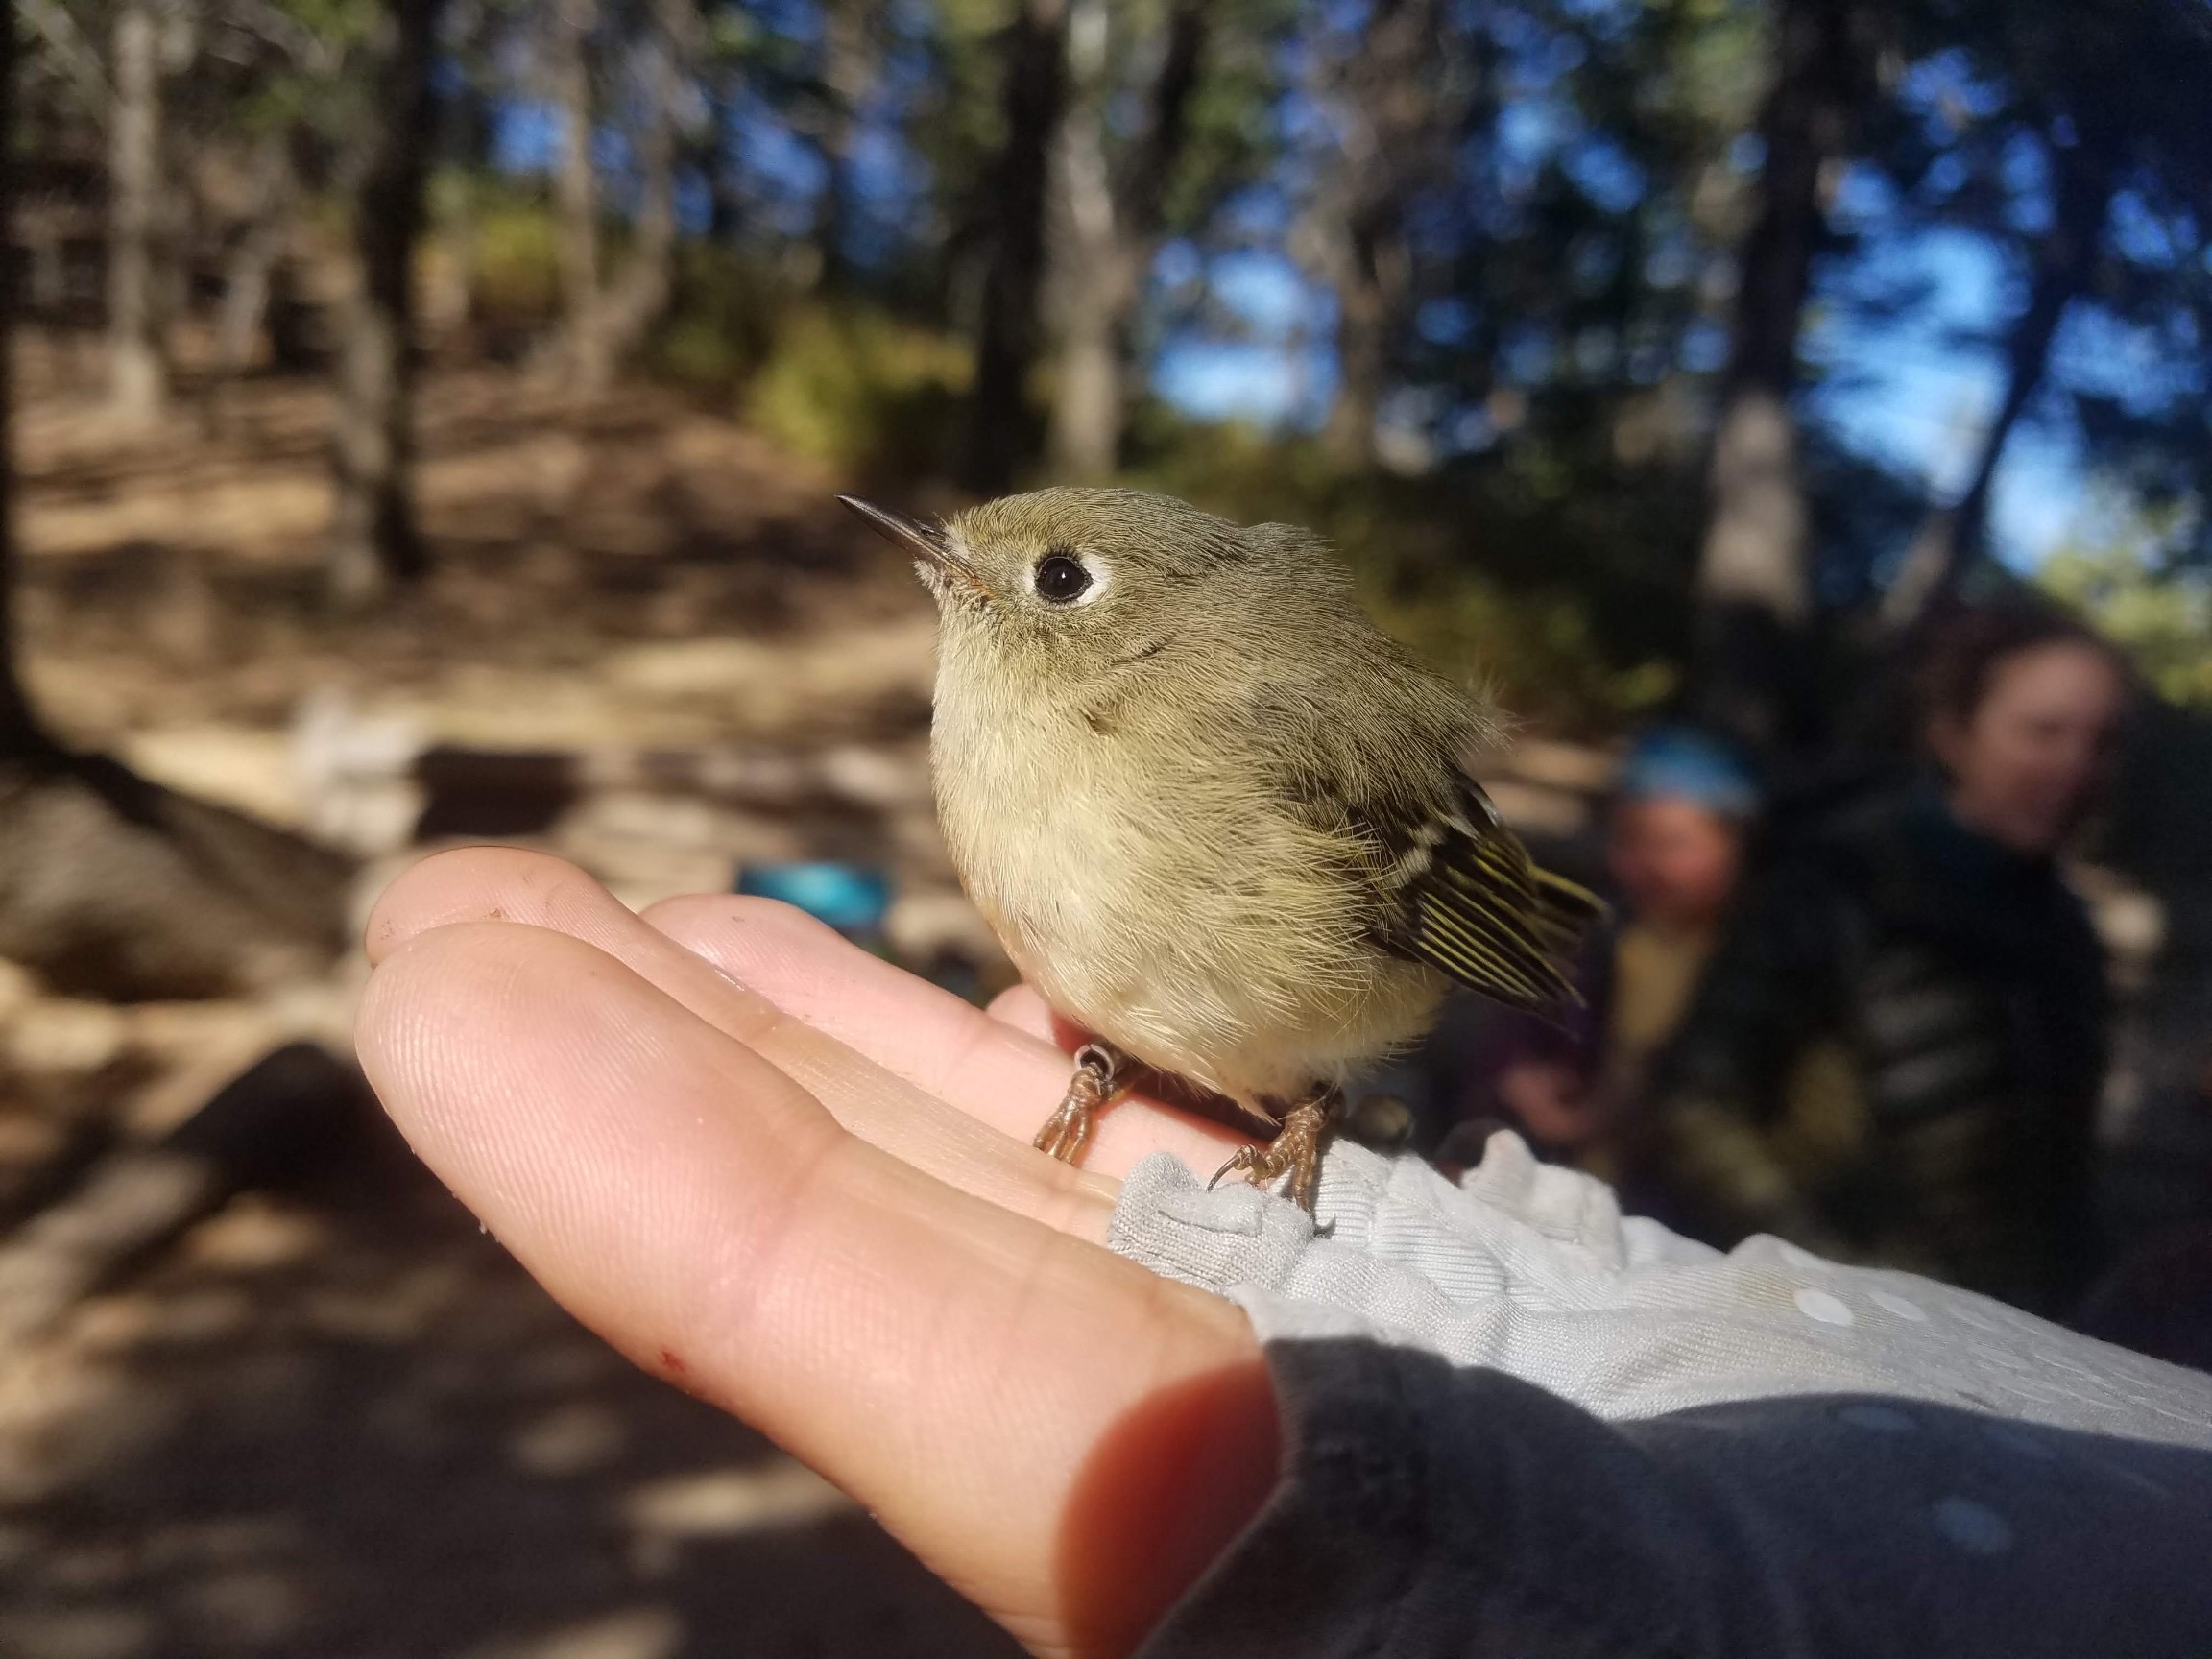 a small greenish bird sits perched in the open palm of a biologist